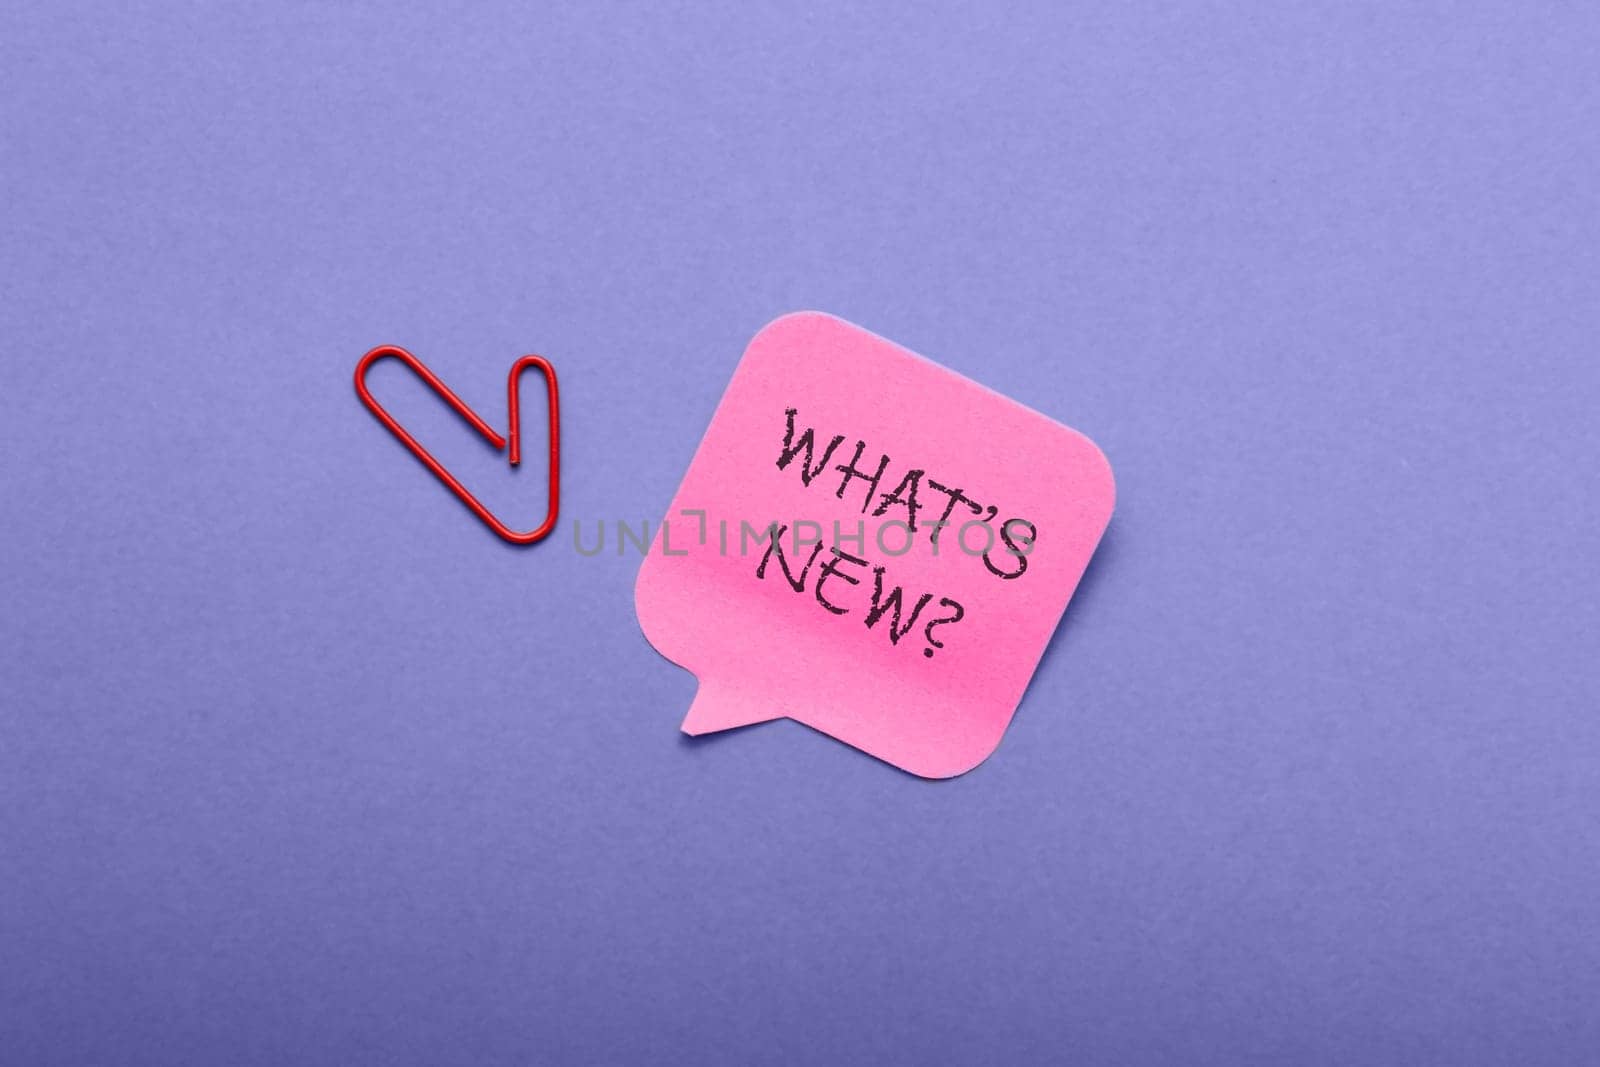 A red clip is on a pink piece of paper that says What's new. The clip is on the left side of the paper and the paper is on a blue background